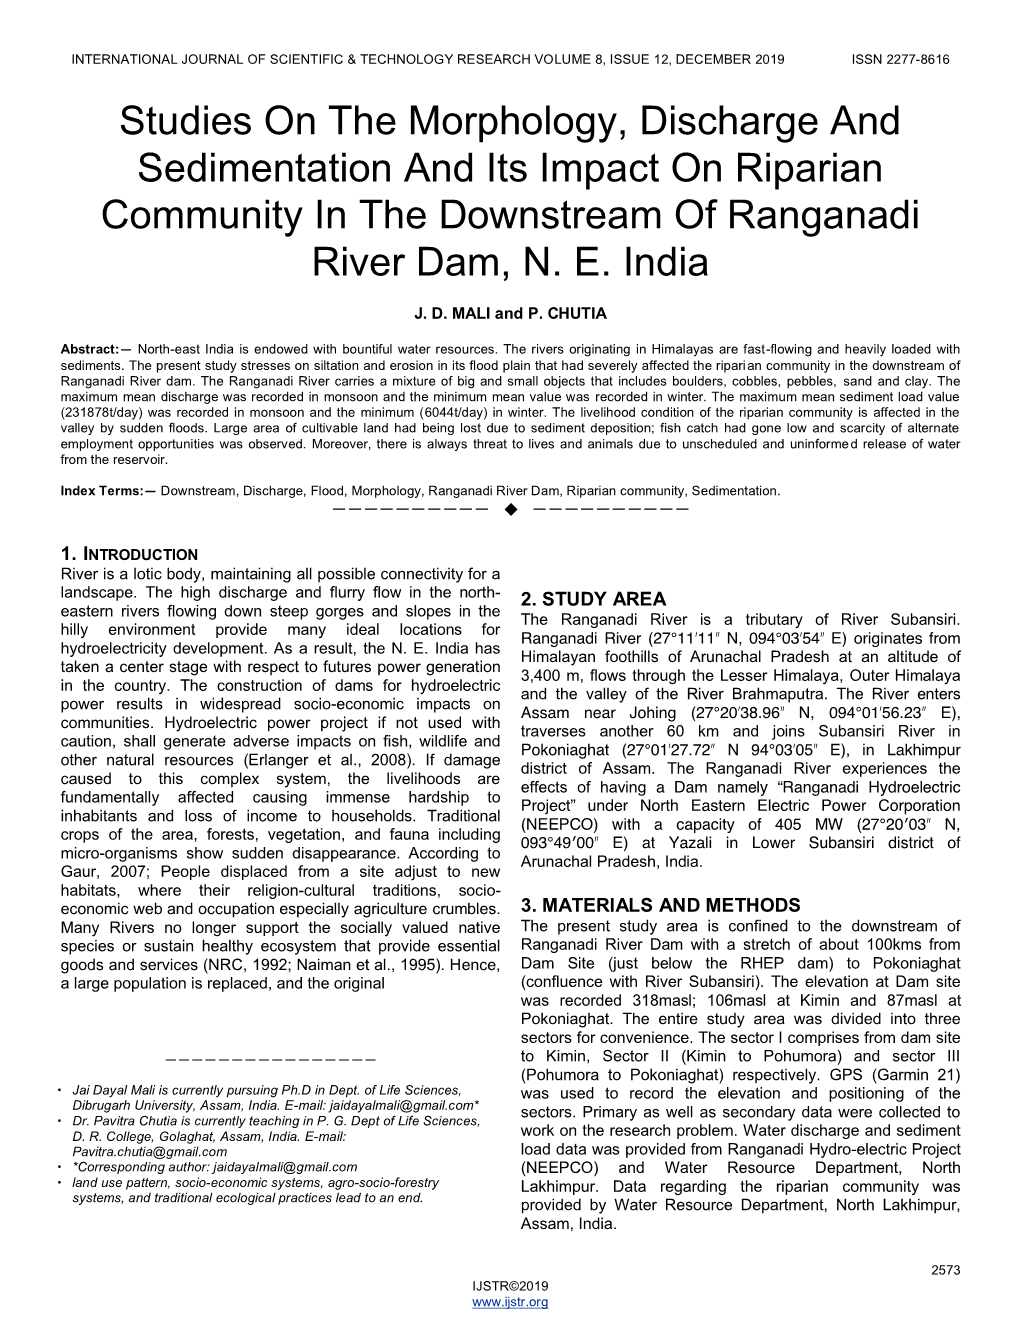 Studies on the Morphology, Discharge and Sedimentation and Its Impact on Riparian Community in the Downstream of Ranganadi River Dam, N